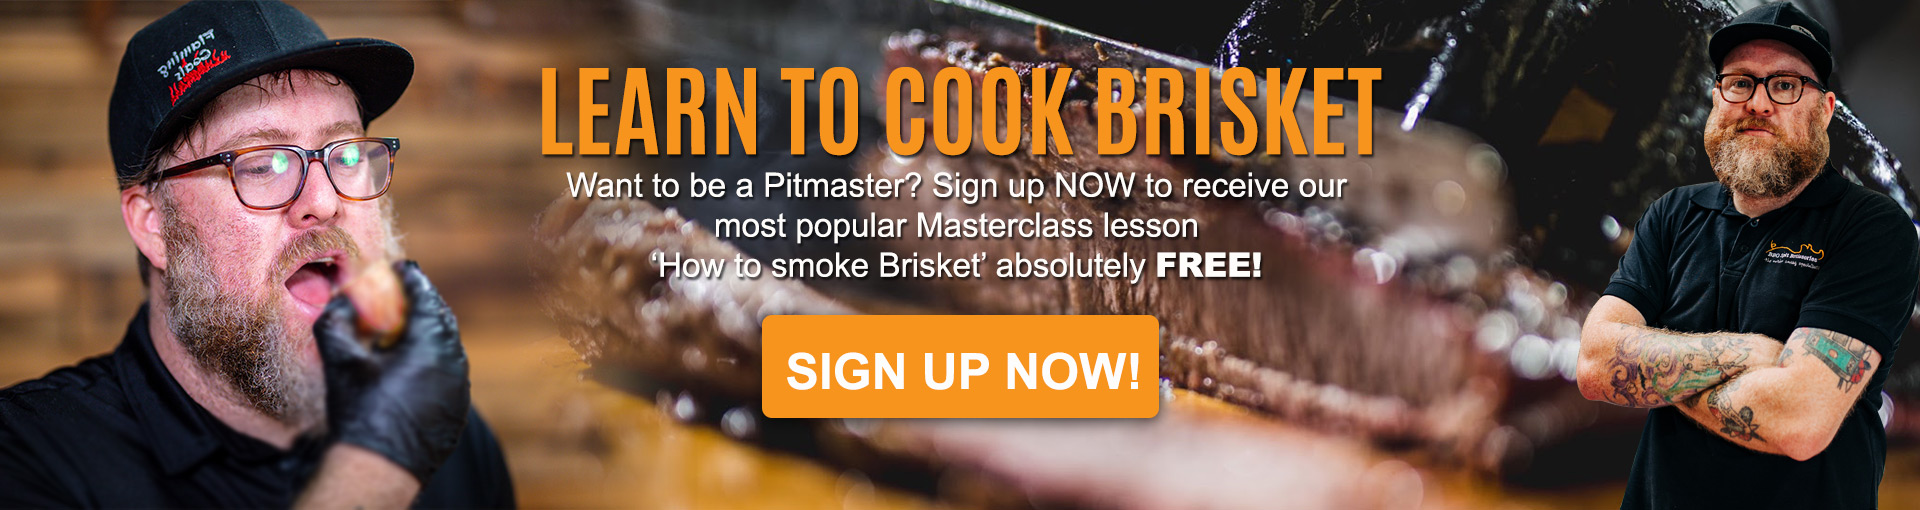 Learn to Cook Brisket